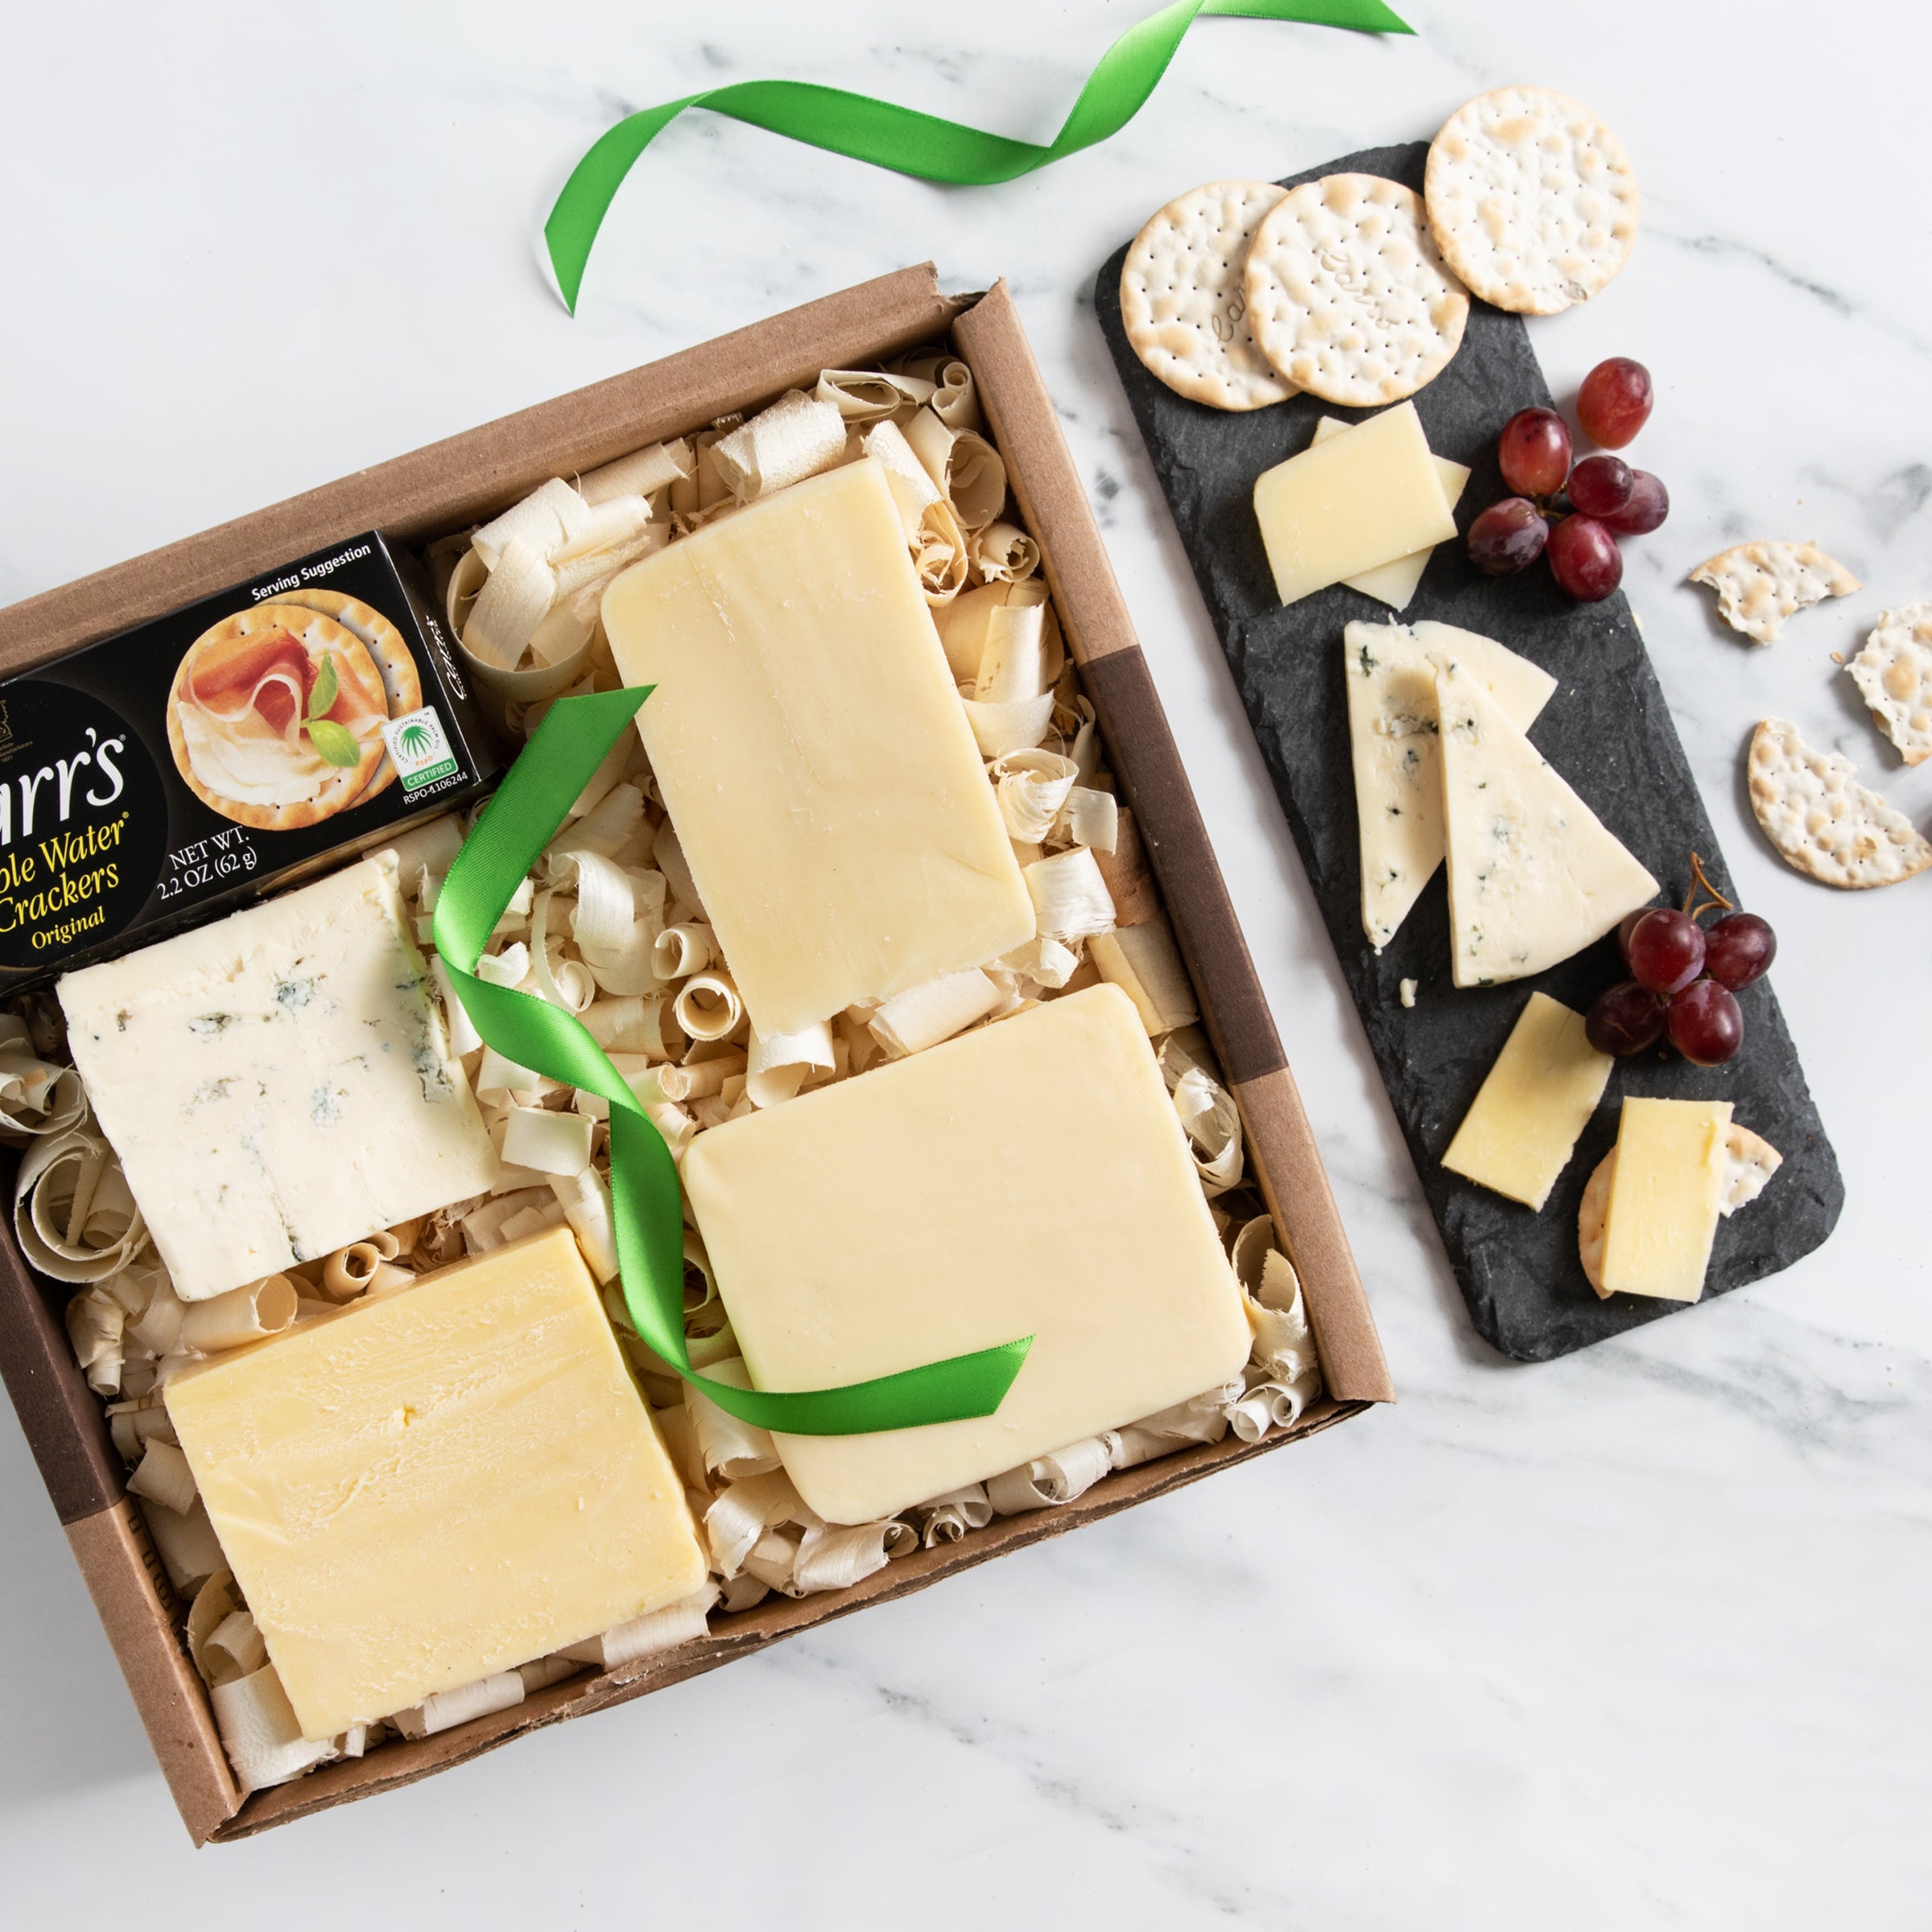 https://cdn.shopify.com/s/files/1/0082/7722/9604/products/AG496_igourmet_four_continents_of_cheese_sampler_box-4.jpg?v=1622567140